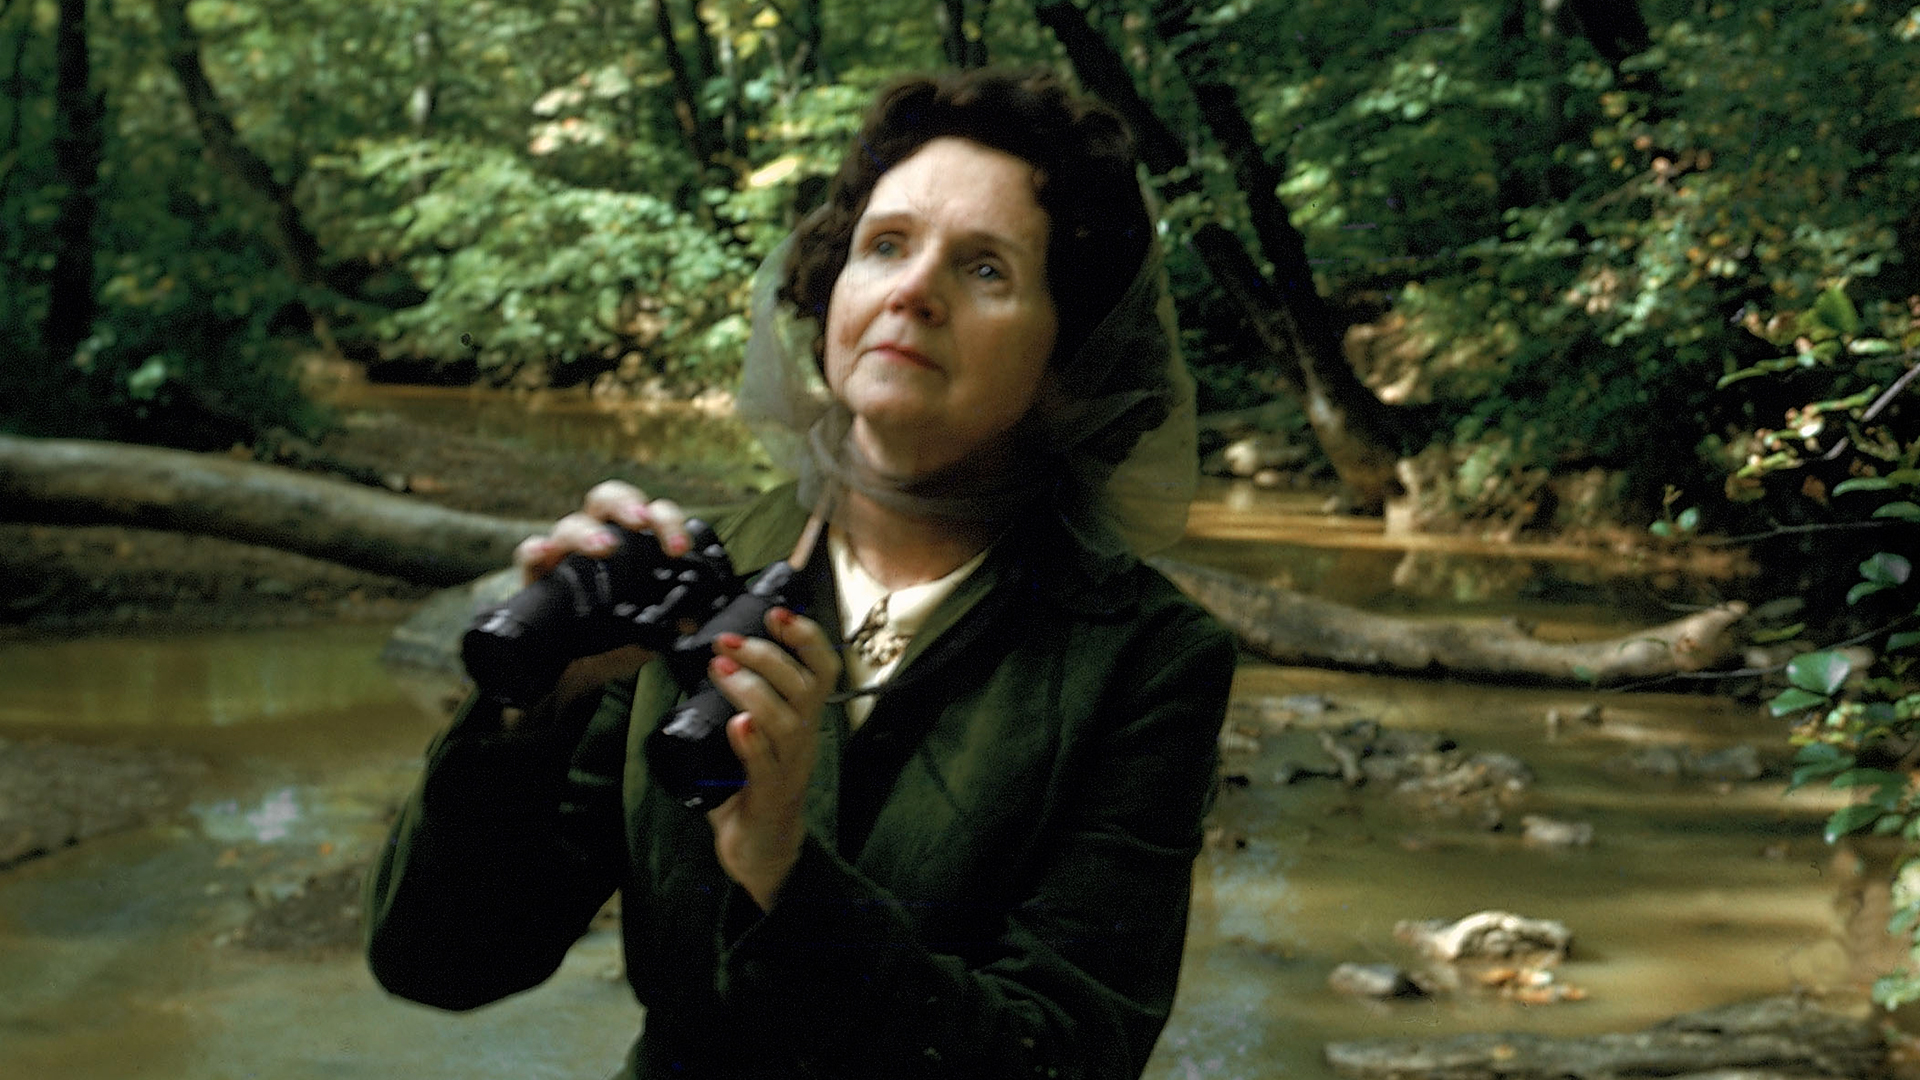 September 27, 1962: Rachel Carson’s “Silent Spring” Was Published